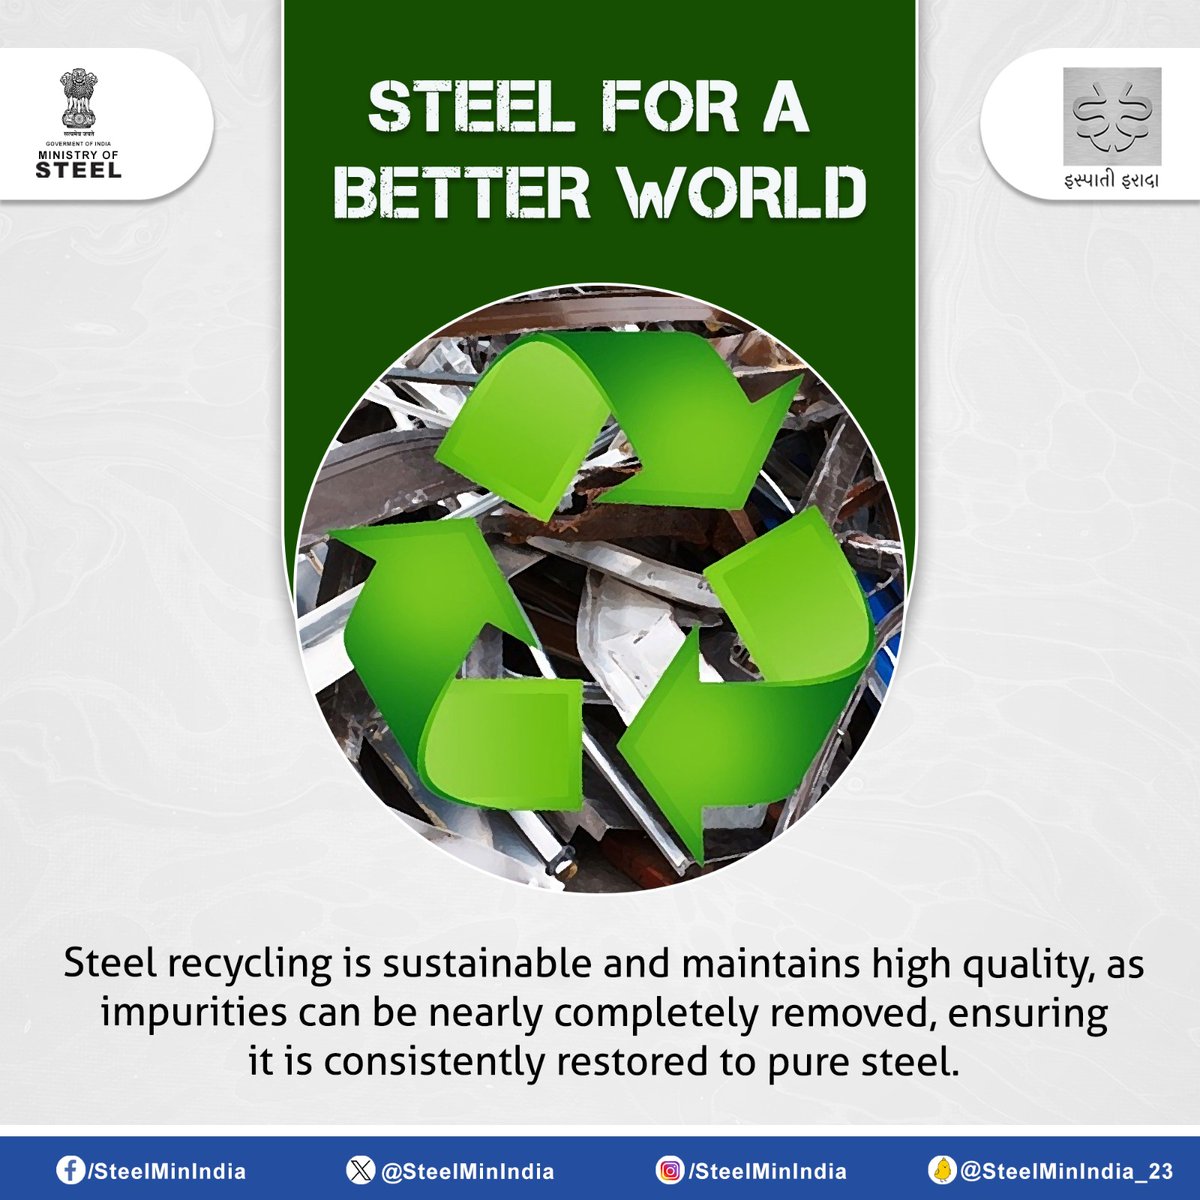 Discover the eco-friendly essence of steel in our journey towards a better world. From its recyclability to its durability, steel is shaping a sustainable future. Let's build greener together! 🌱🏗️

#SteelForABetterWorld #SustainableSteel #IspatiGyan #IspatiIrada